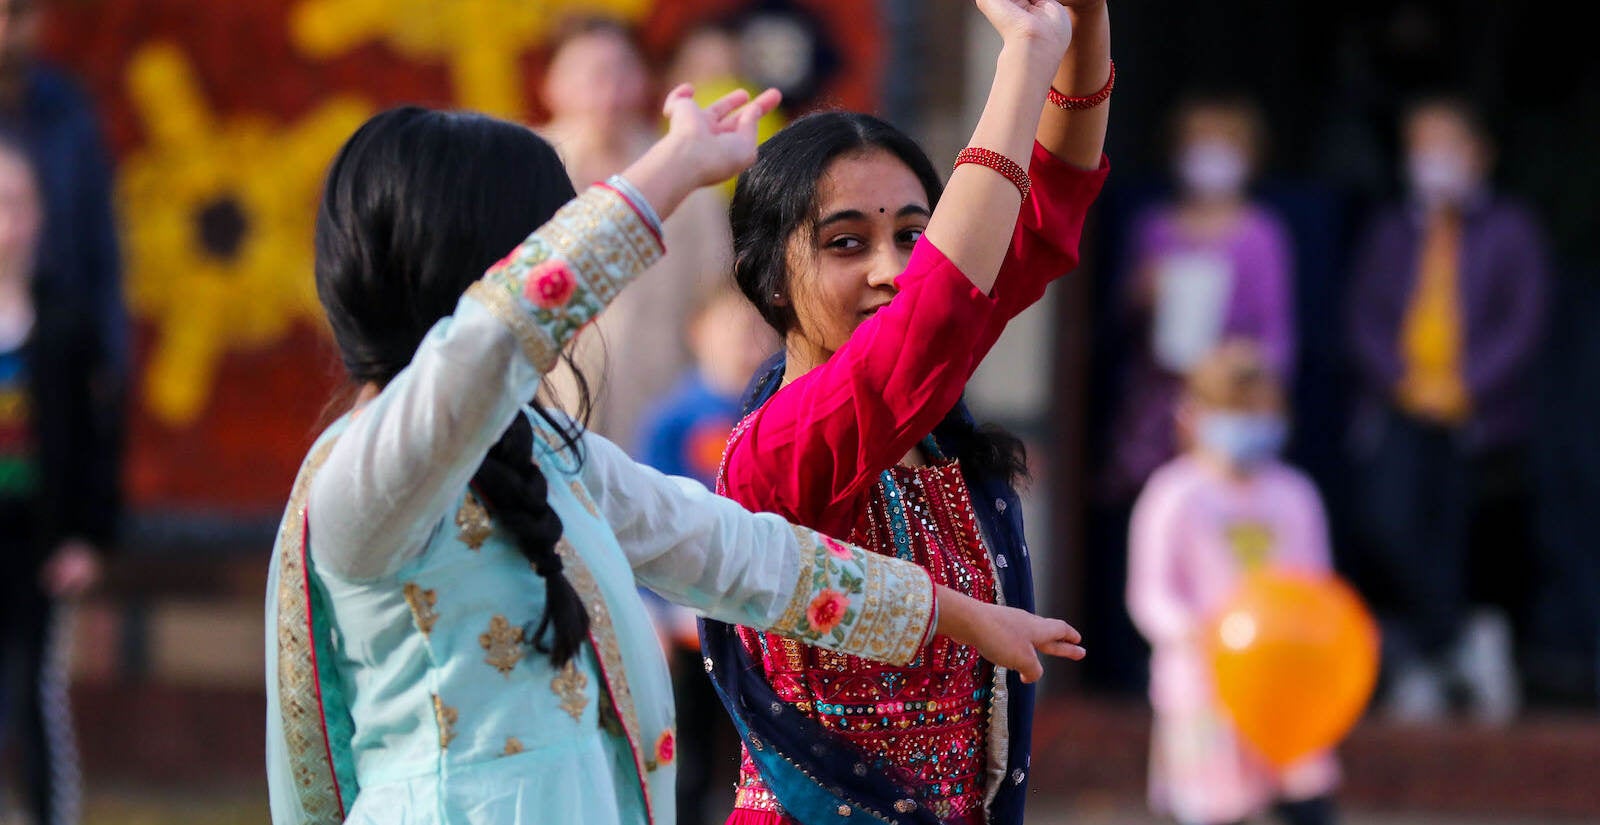 Saanvi Potnis (left) and Arya Haridas (right), of Doylestown, dancing at the first annual Diwali festival in Doylestown on Nov. 7, 2021. (Daniella Heminghaus for WHYY)